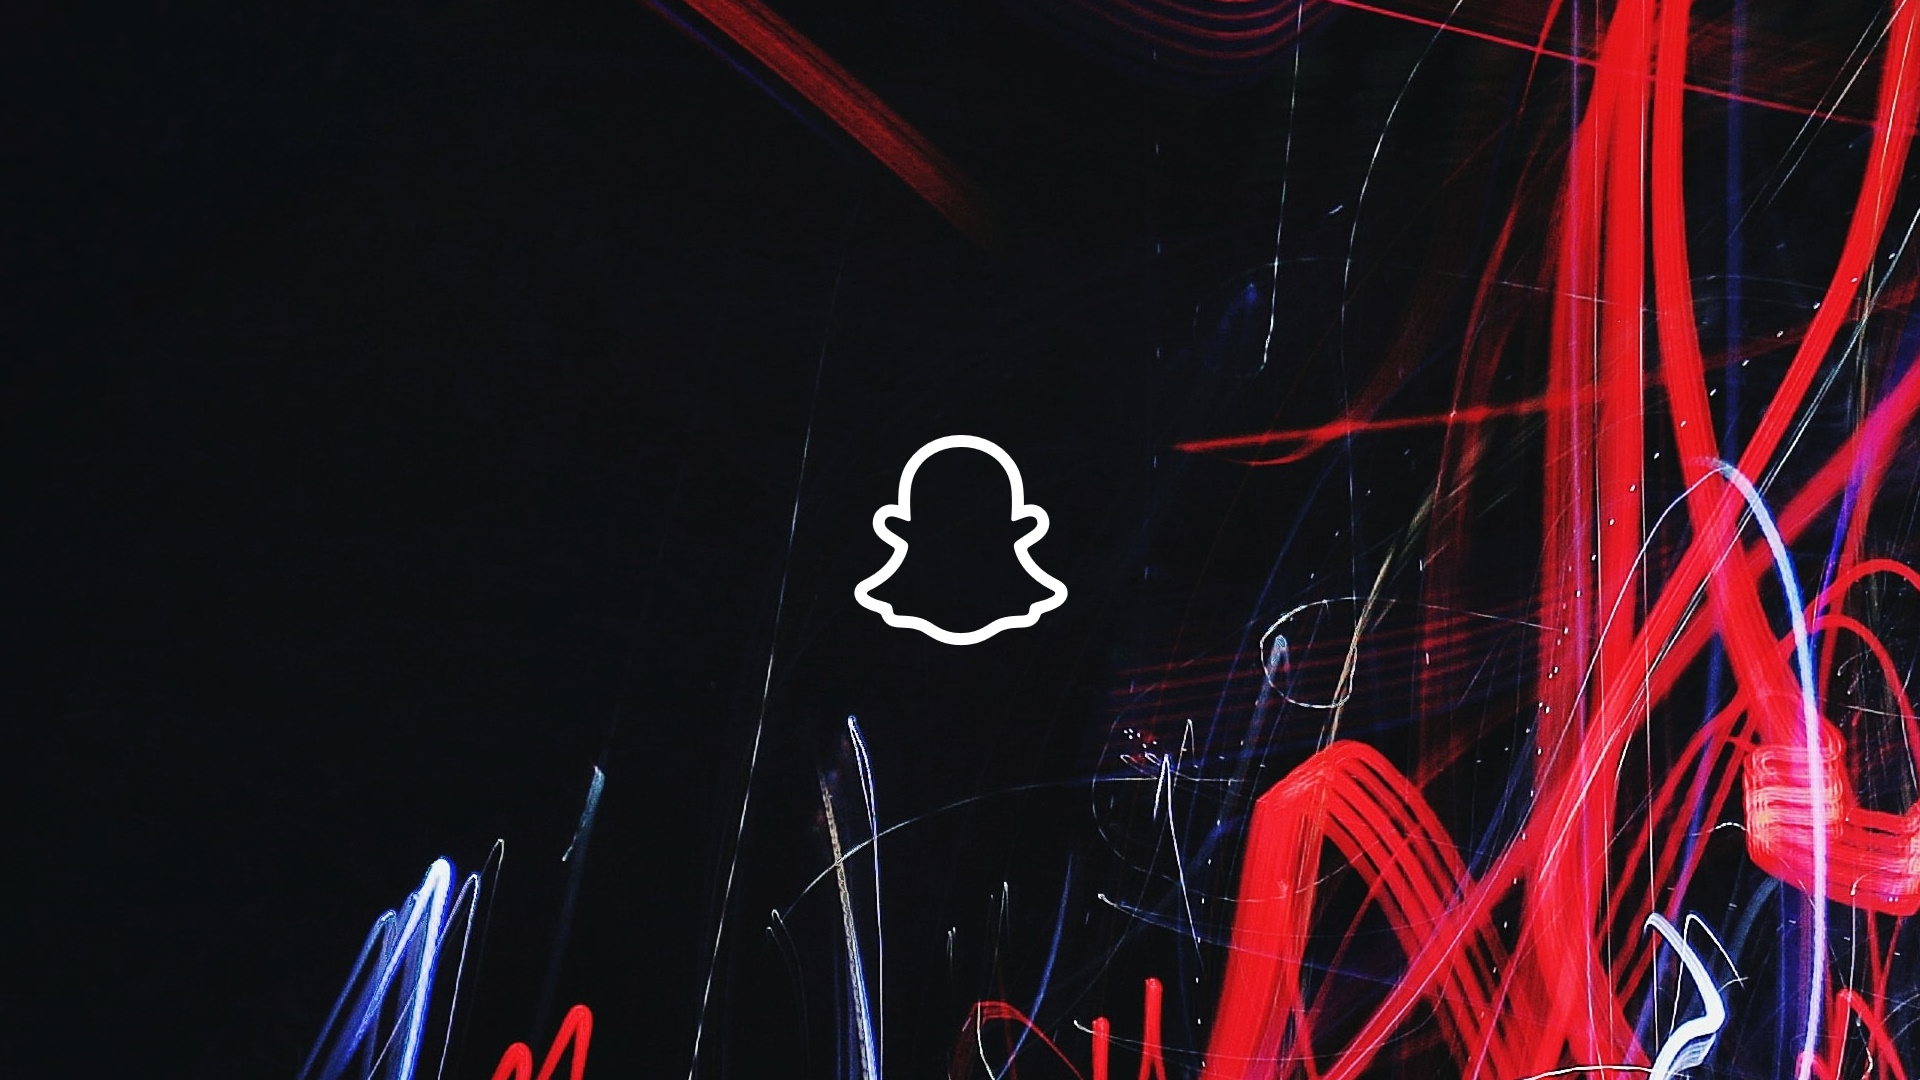 Image of exposure trails with Snapchat logo